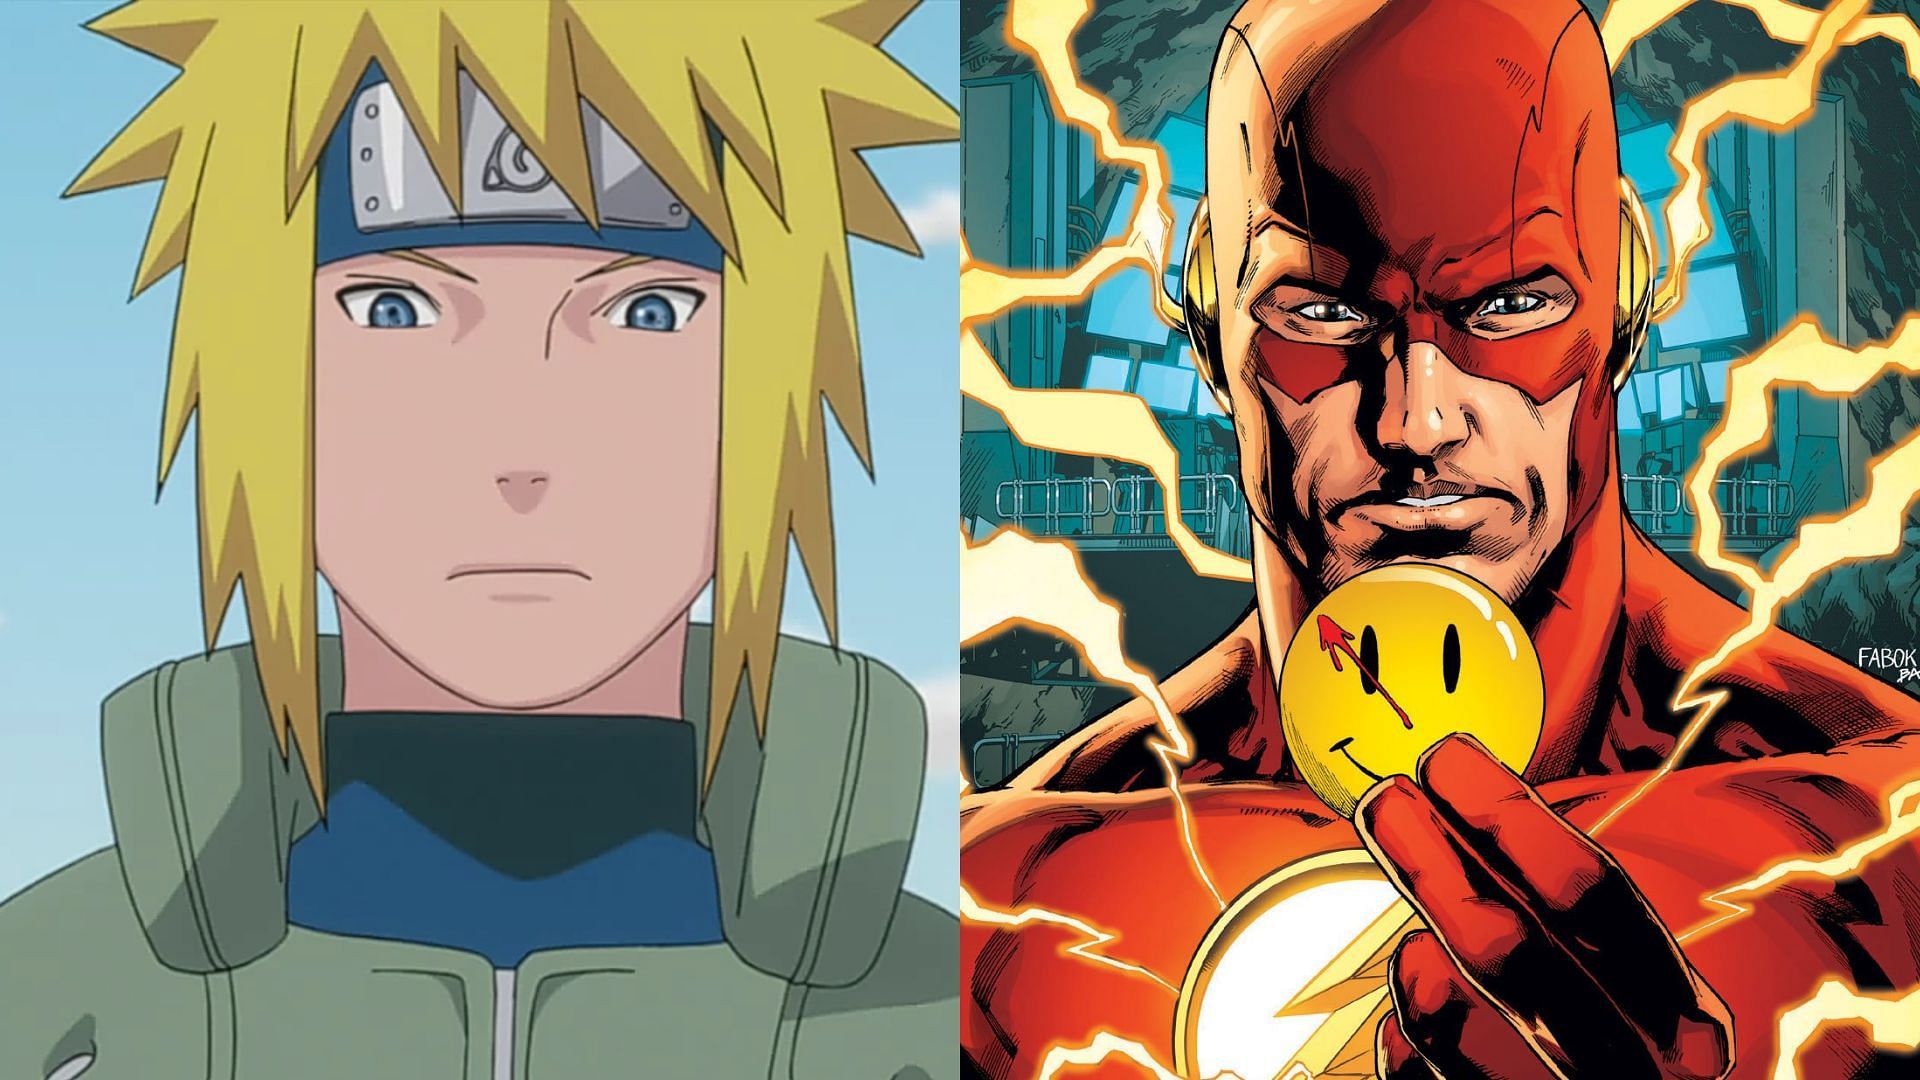 Minato as seen in the Naruto anime and the Flash from the comics (Images via DC Comics and Studio Pierrot)